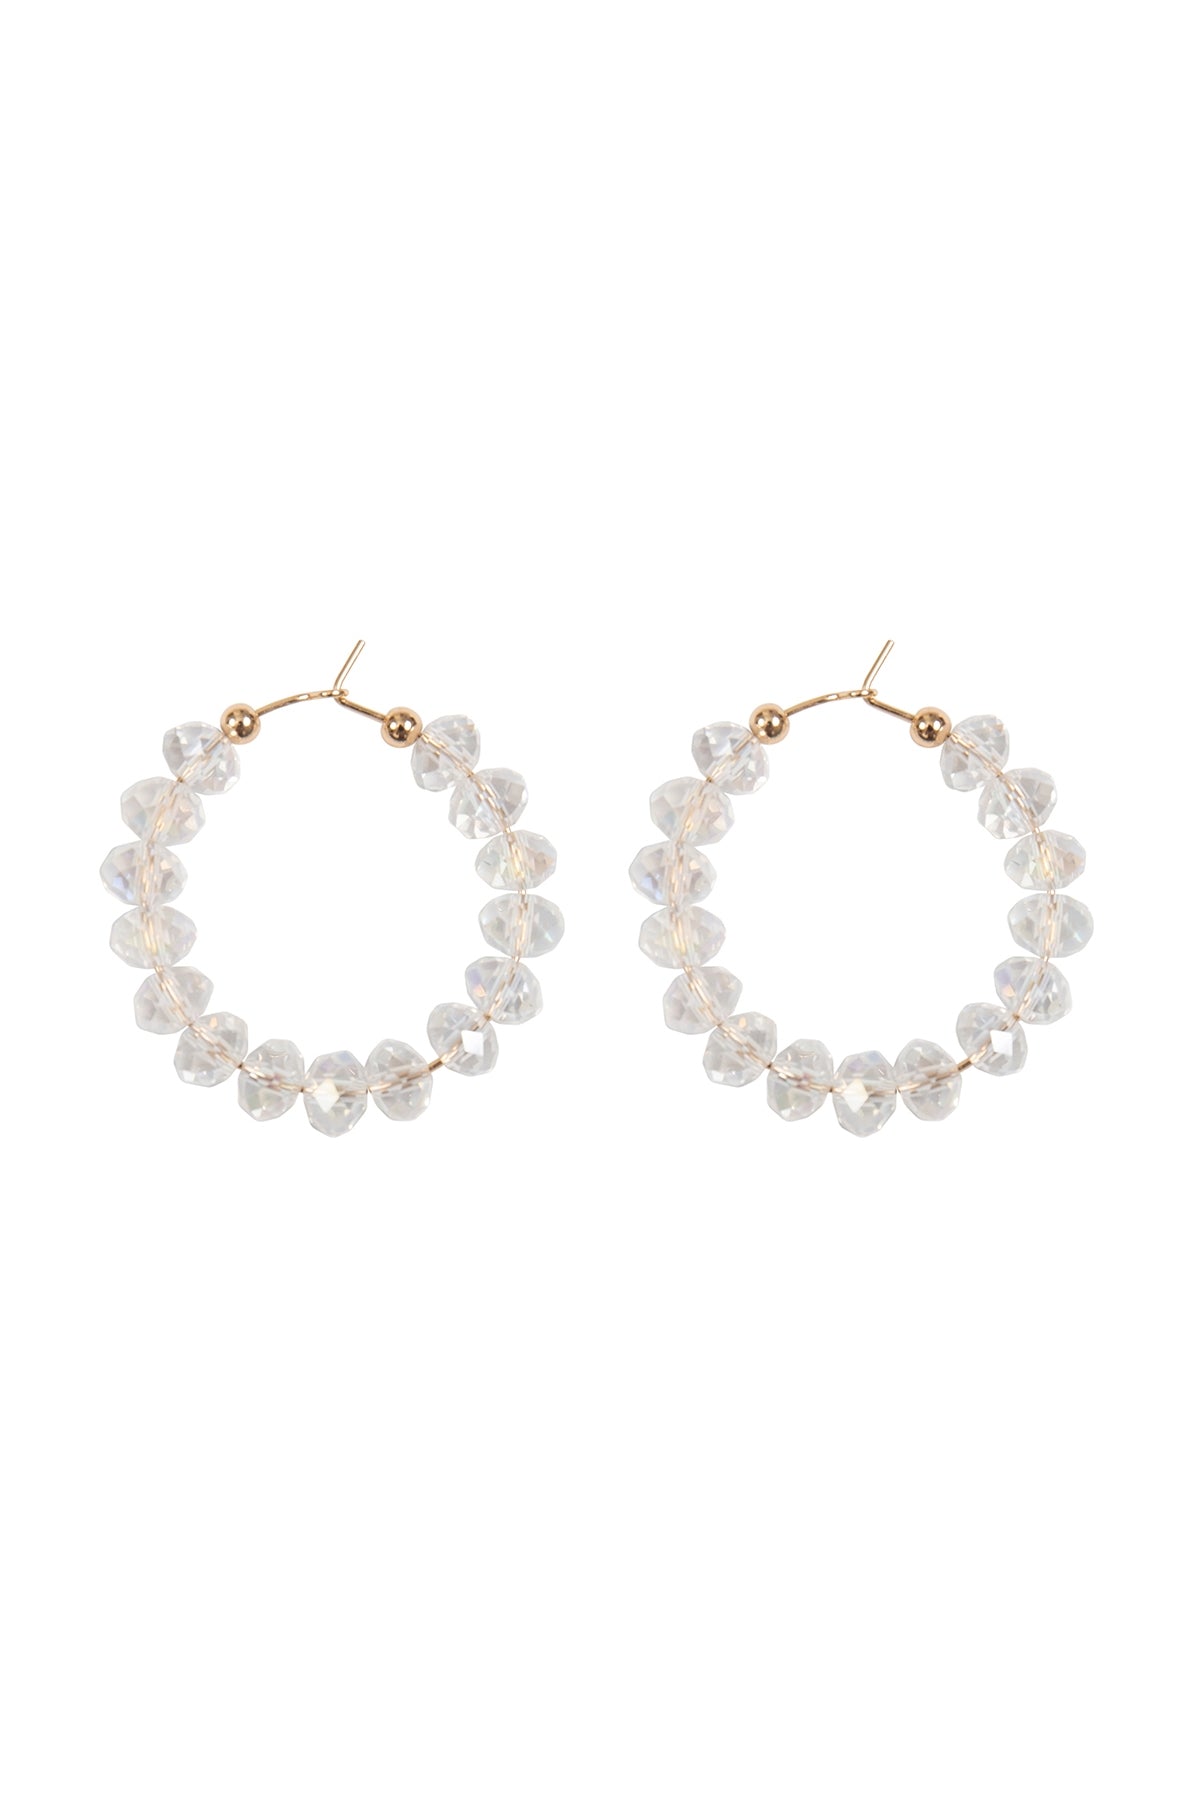 RONDELLE BEADS ROUND HOOP EARRINGS (NOW $2.75 ONLY!)